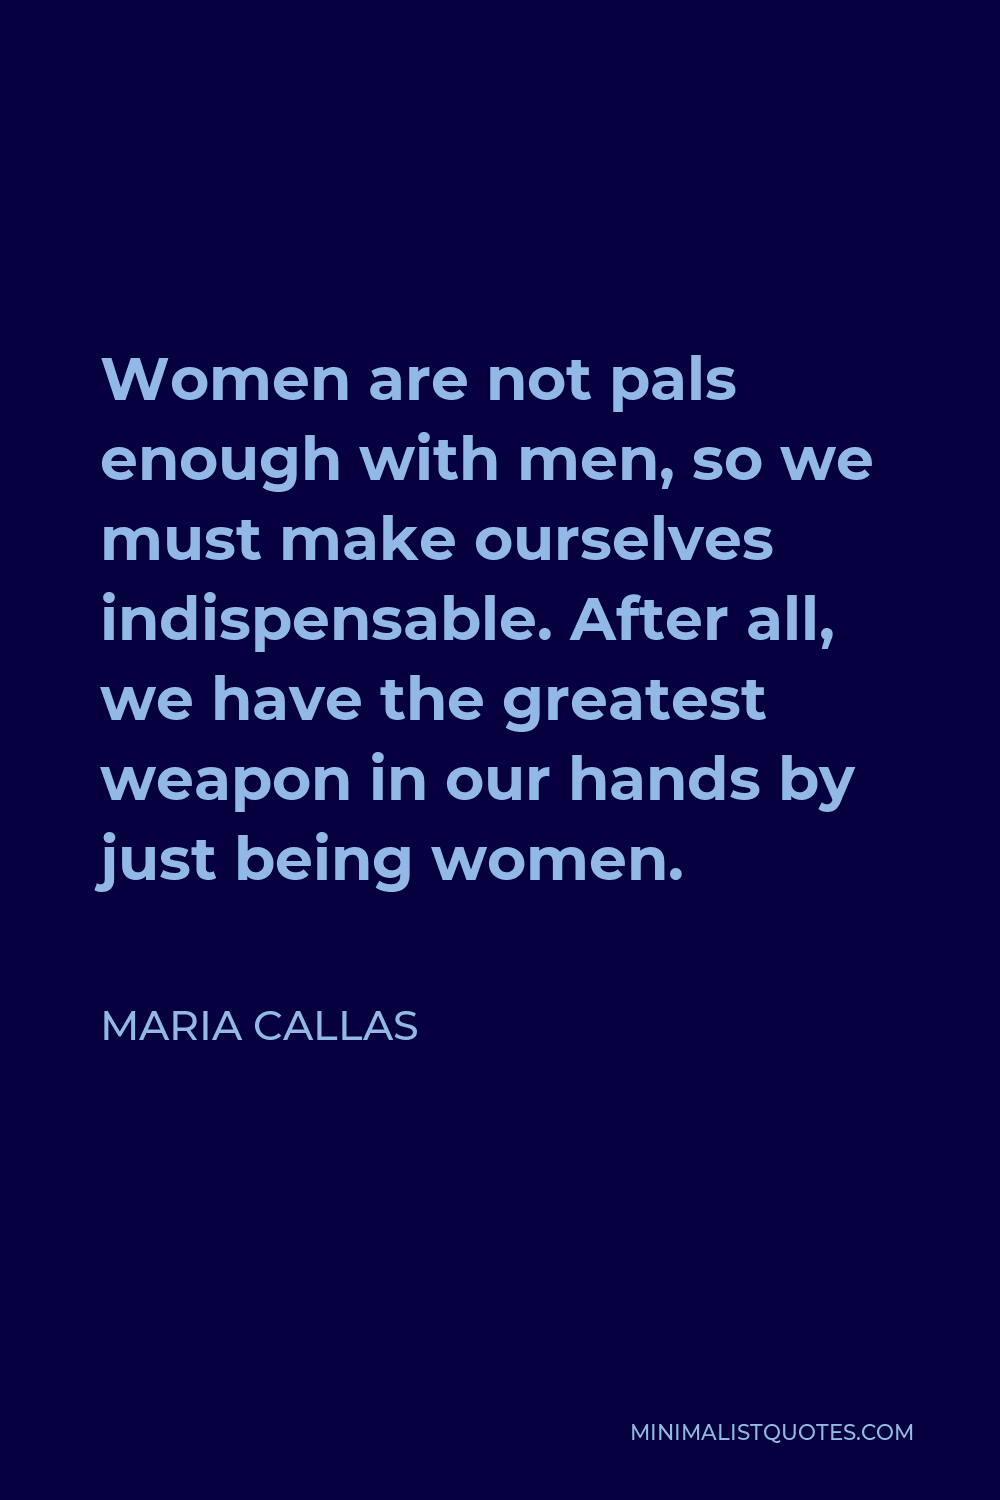 Maria Callas Quote - Women are not pals enough with men, so we must make ourselves indispensable. After all, we have the greatest weapon in our hands by just being women.